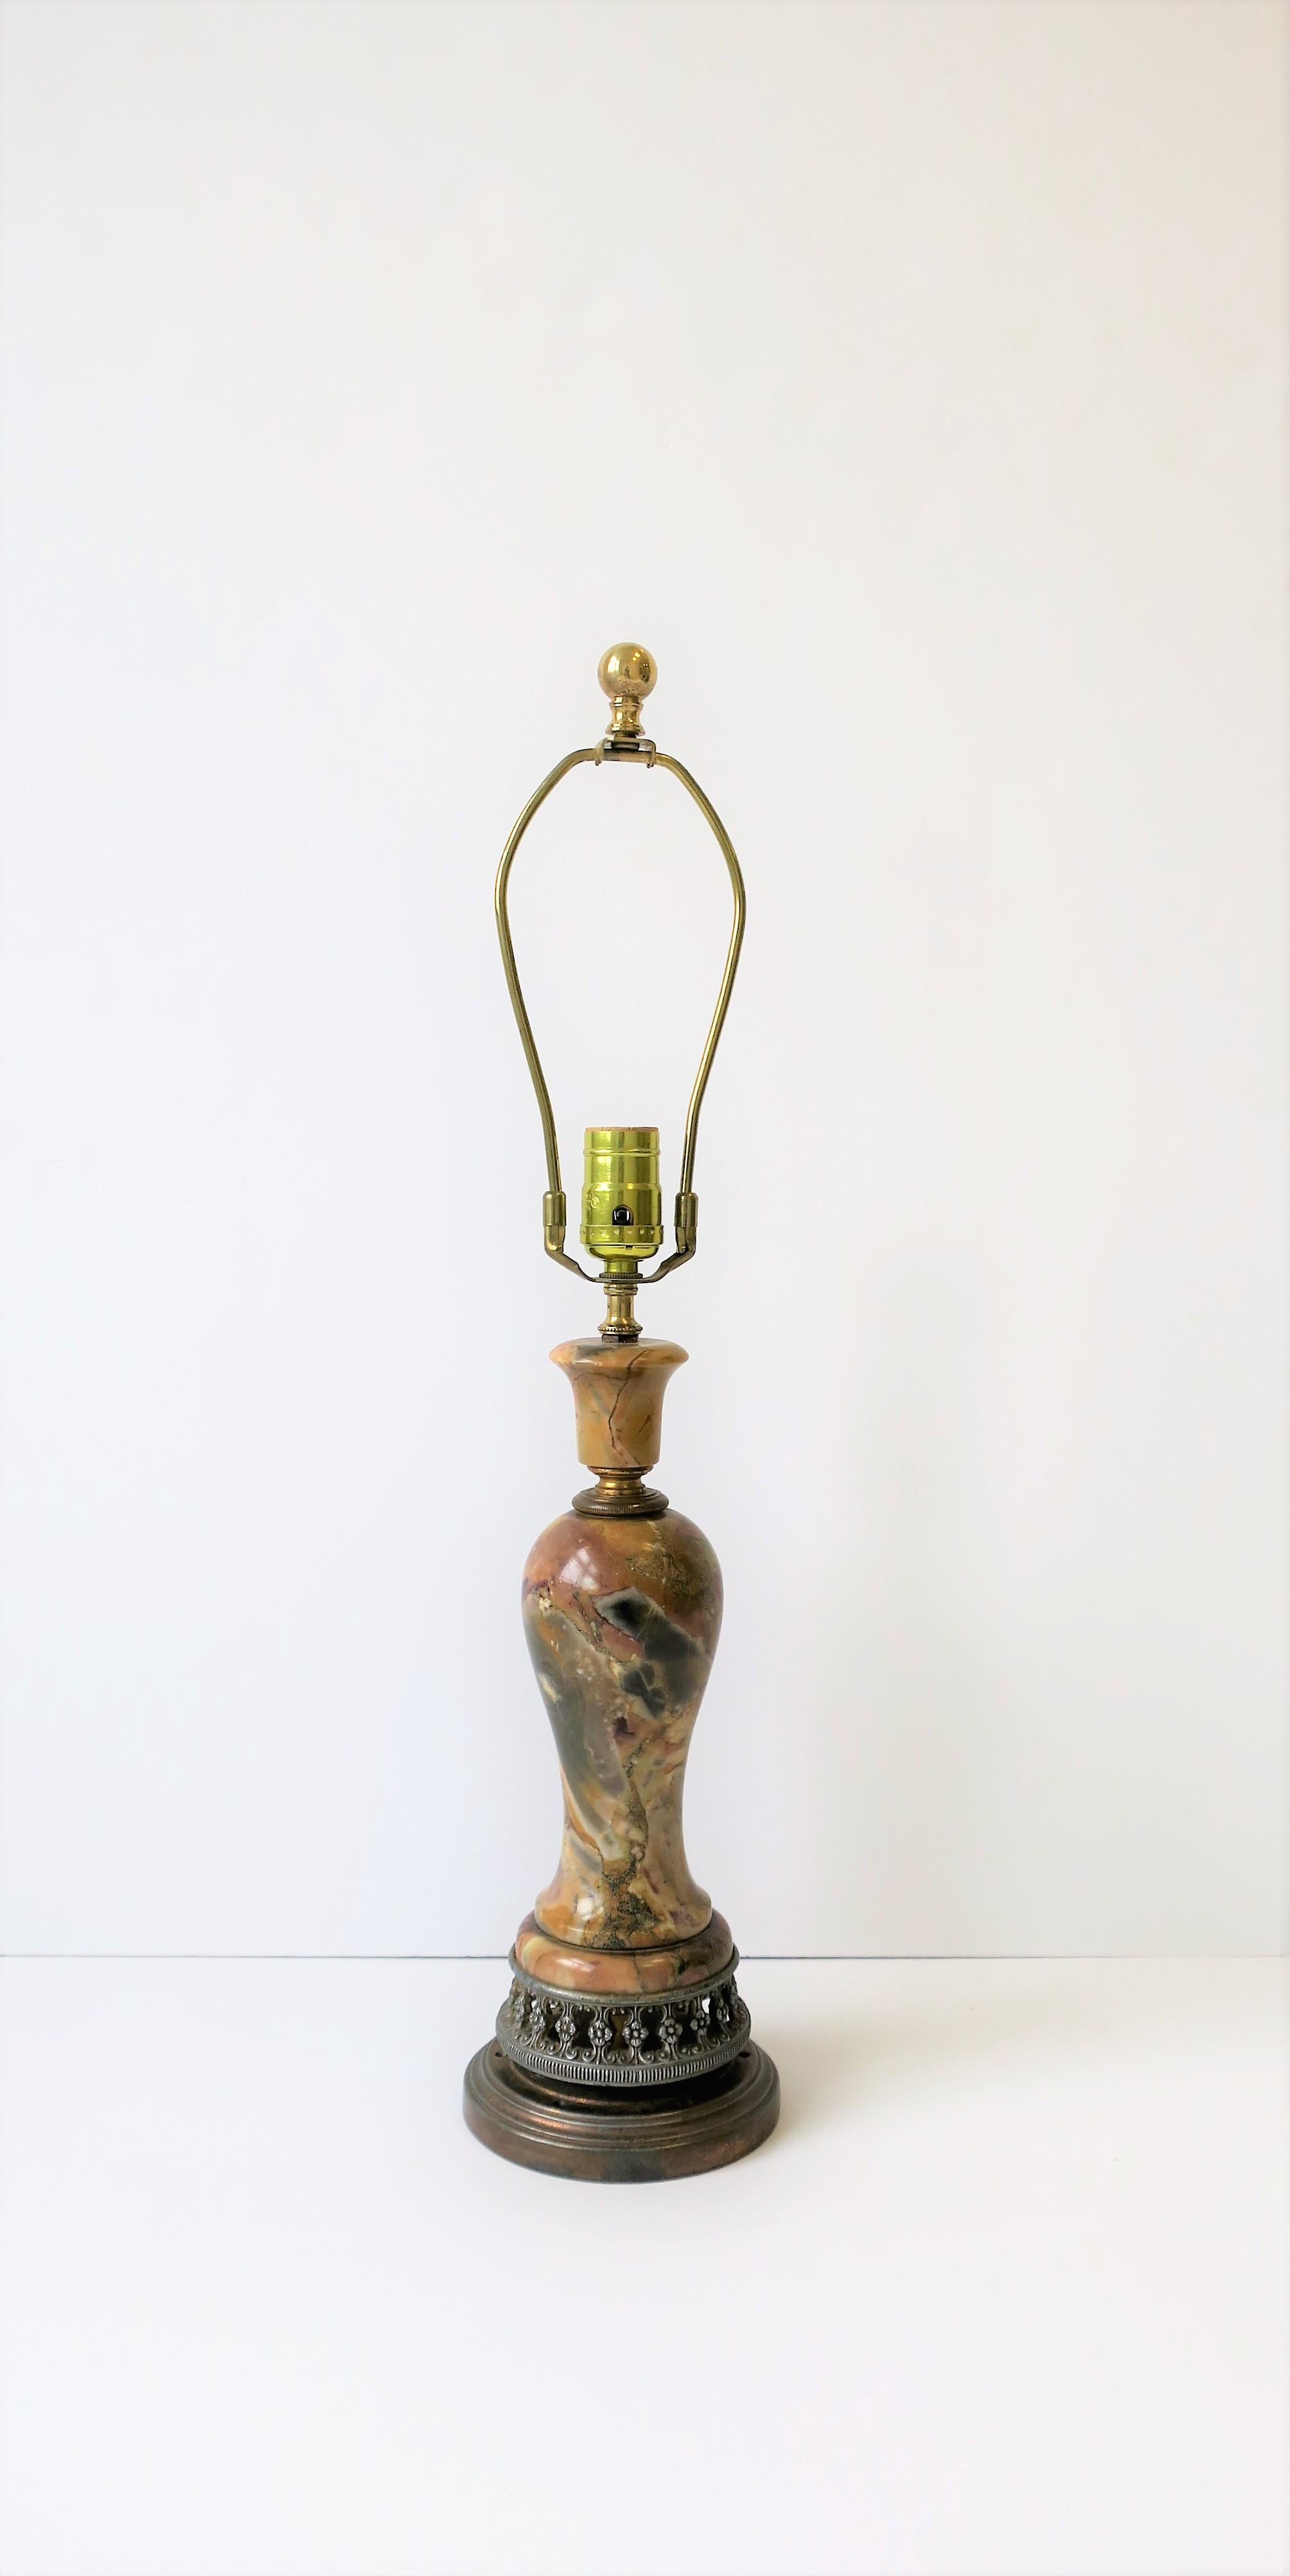 A substantial small to medium sized Italian multicolored solid marble desk or table lamp with decorative metal base, circa mid-20th century, Italy. Multicolored marble in neutral and earth tones finished with detailed metal base. In fine working